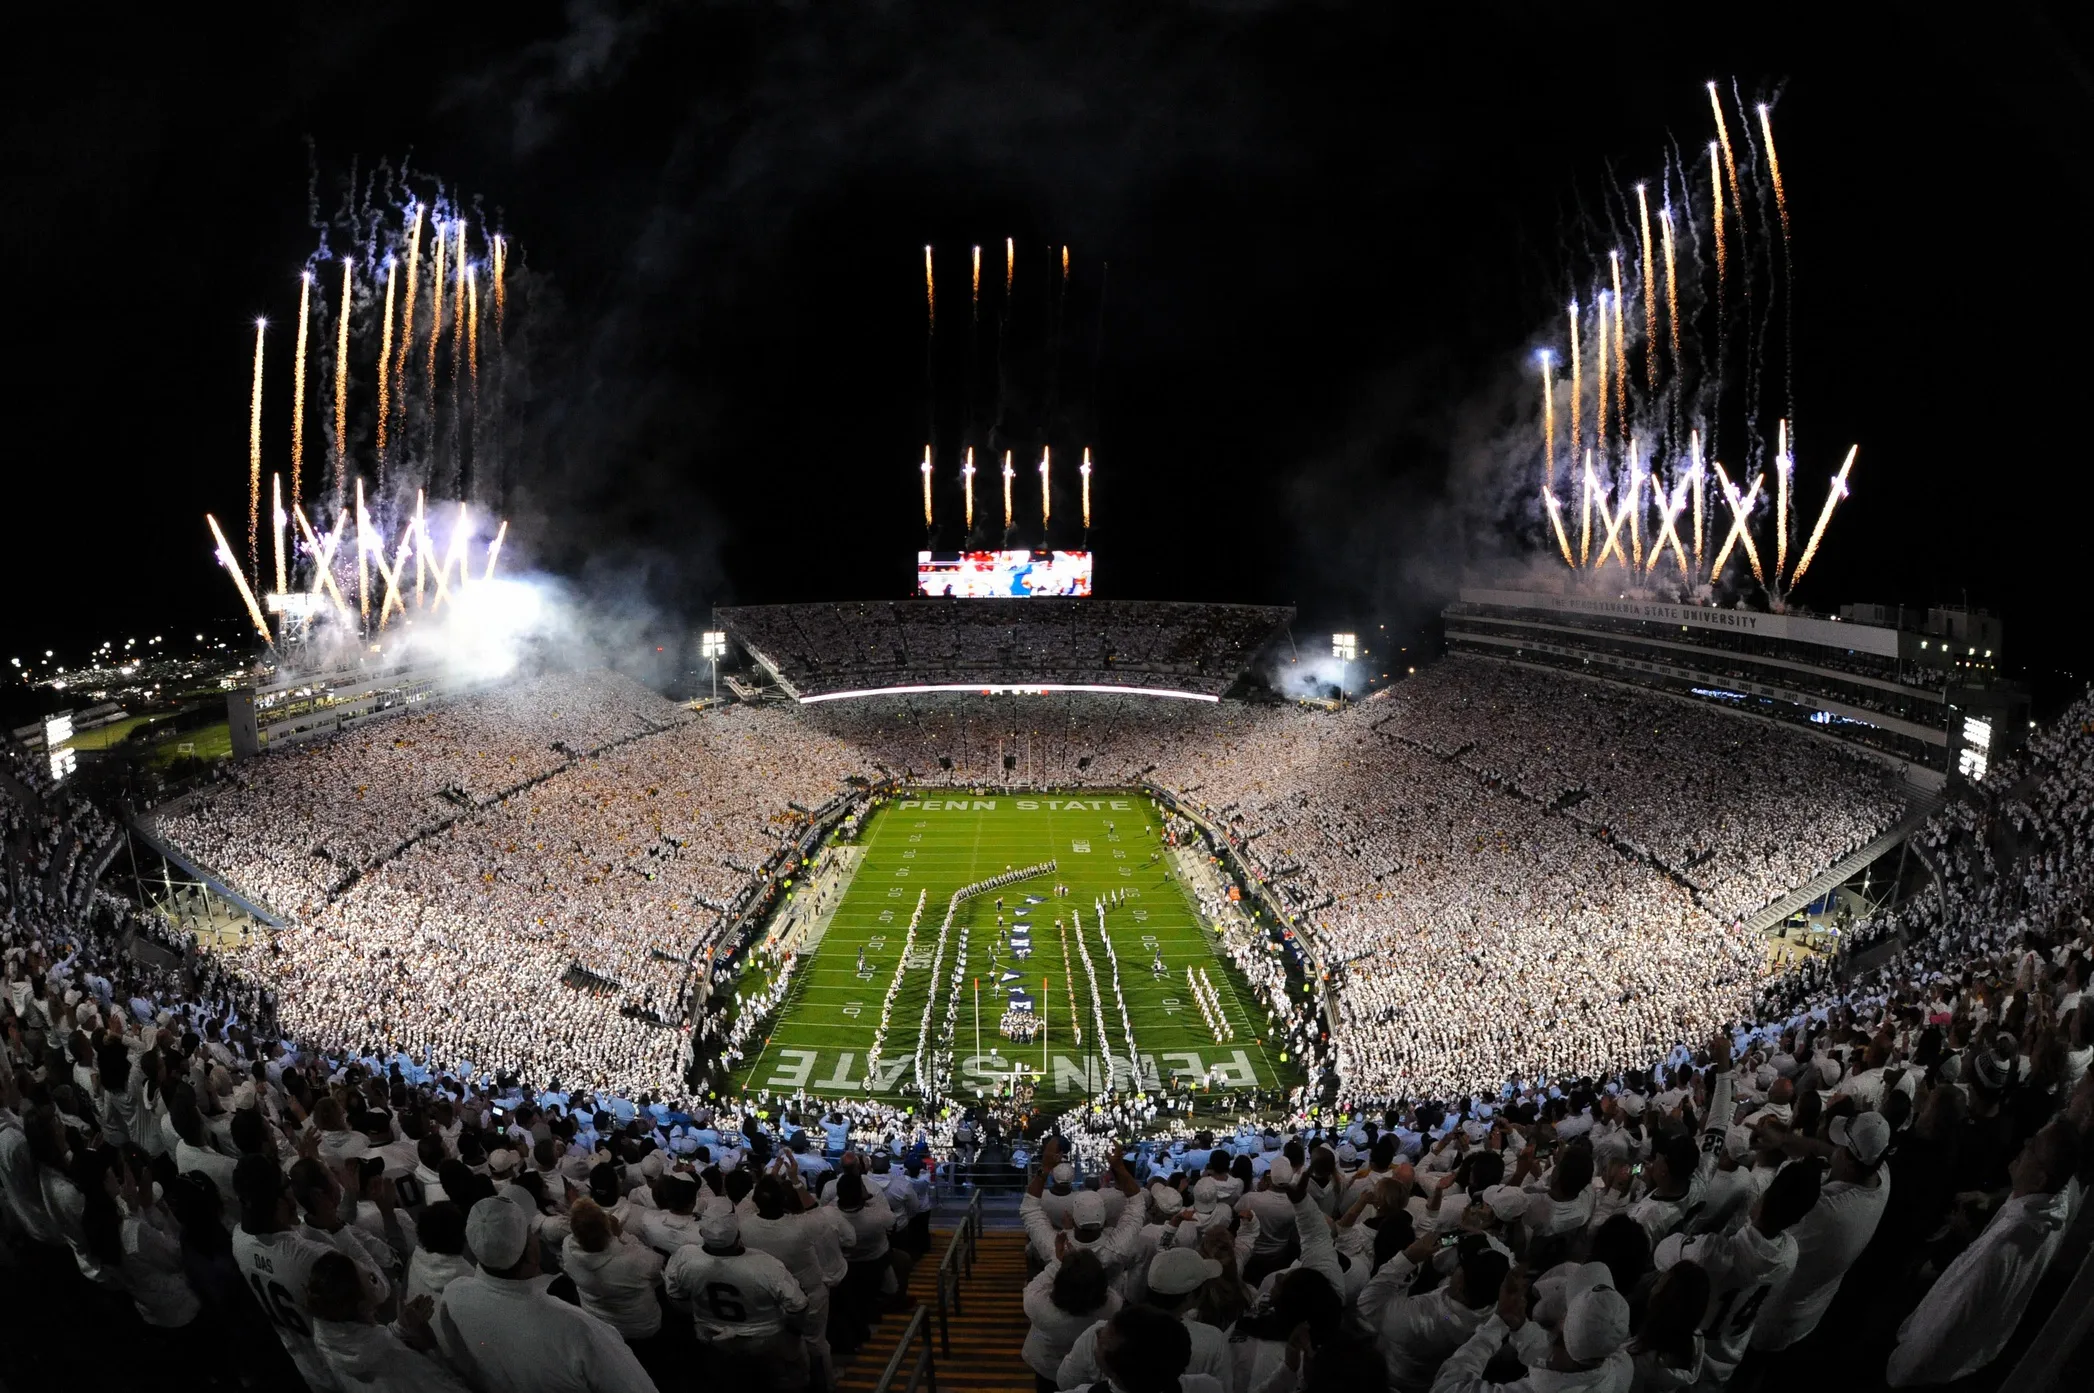 The Best College Football Stadiums to Visit